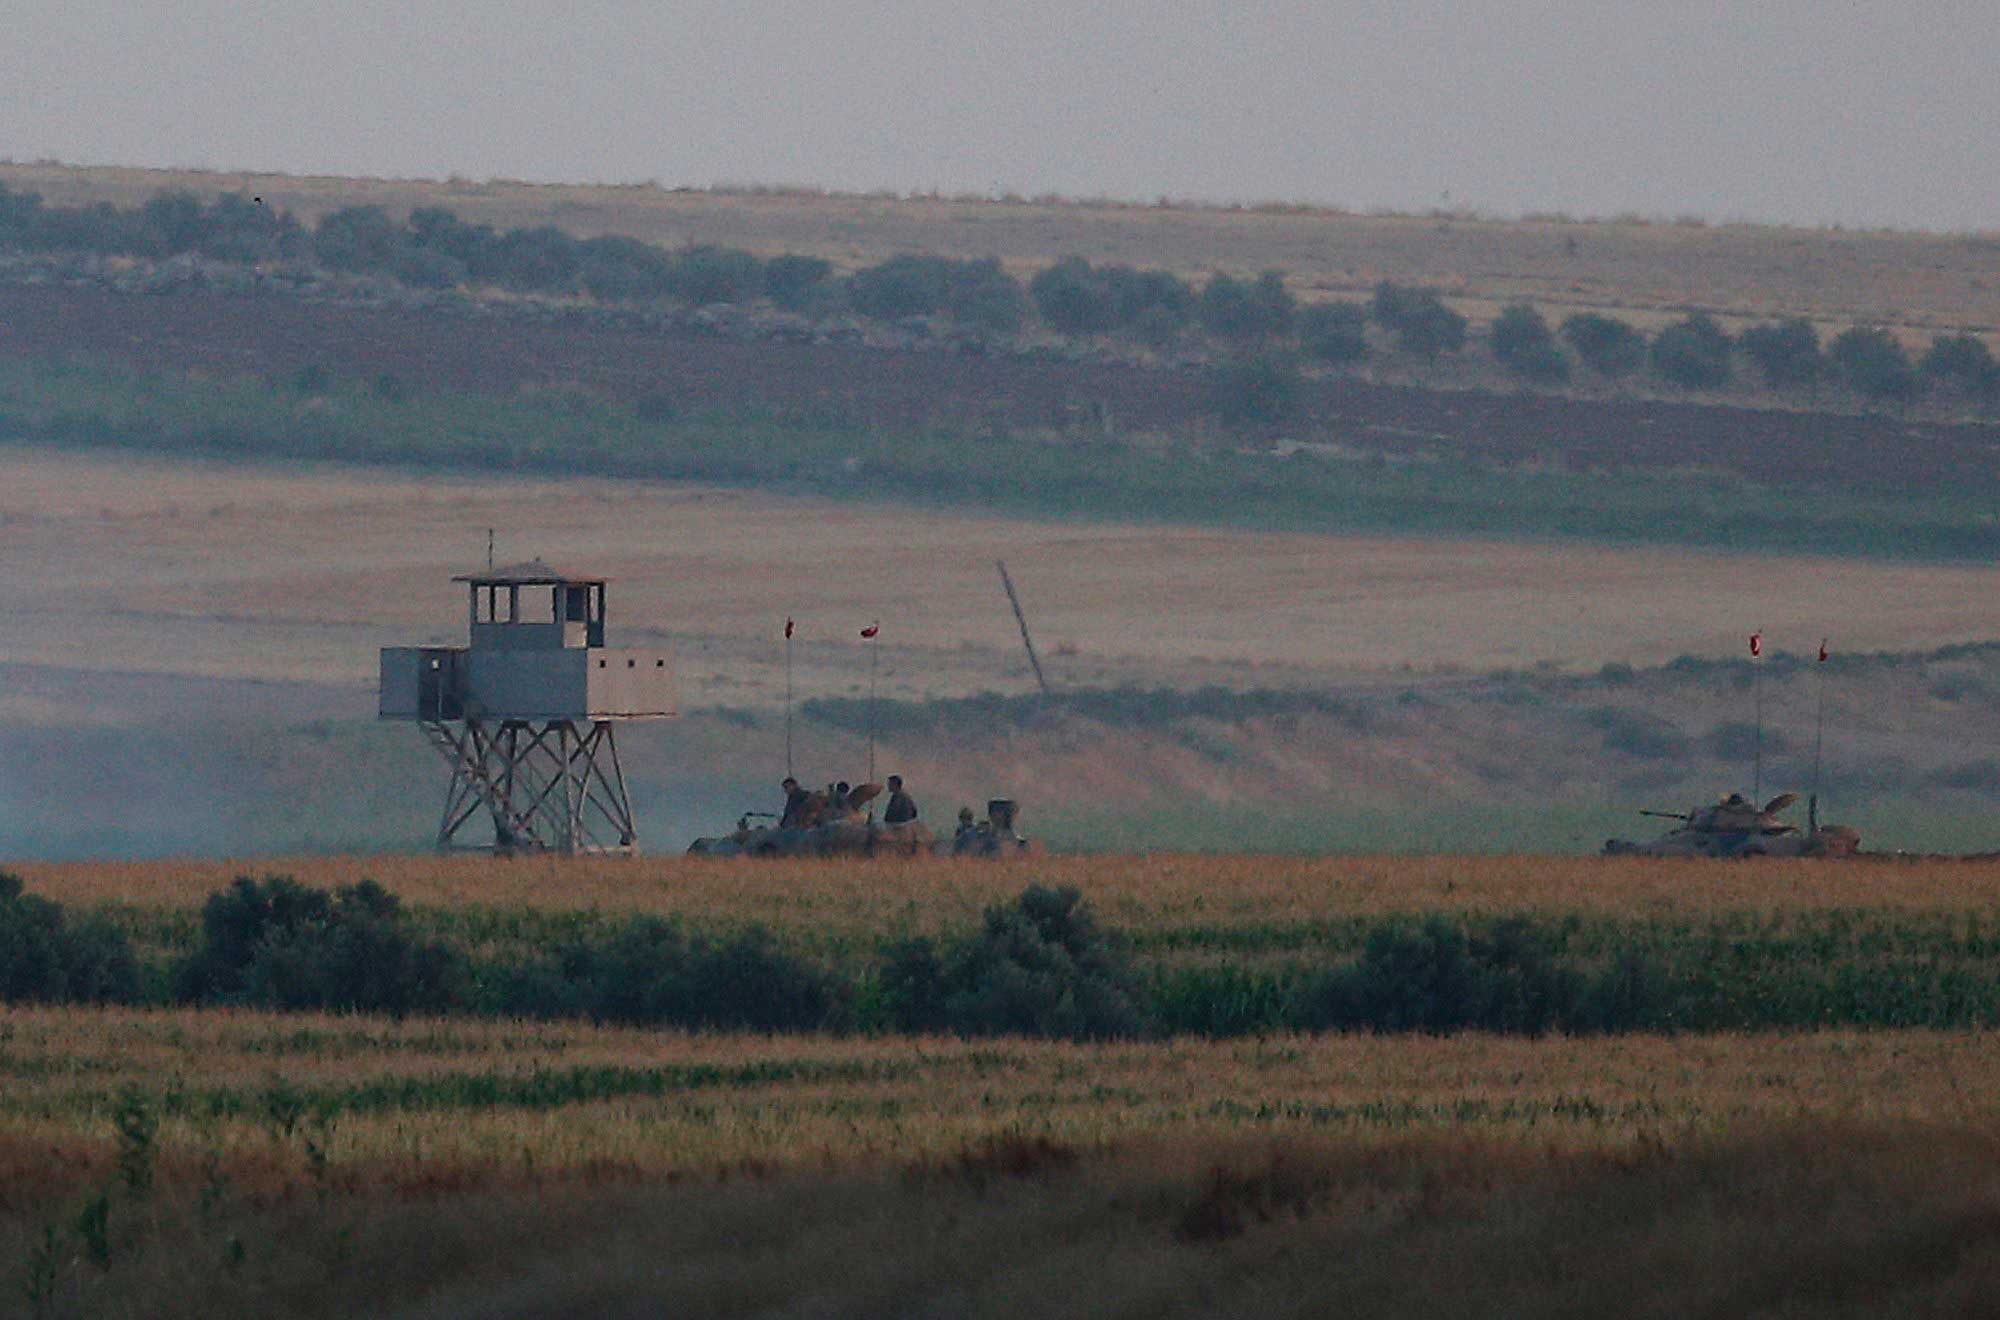 Turkish army tanks hold positions next to an outpost, near the border with Syria, on July 23, 2015. (Emrah Gurel—AP)